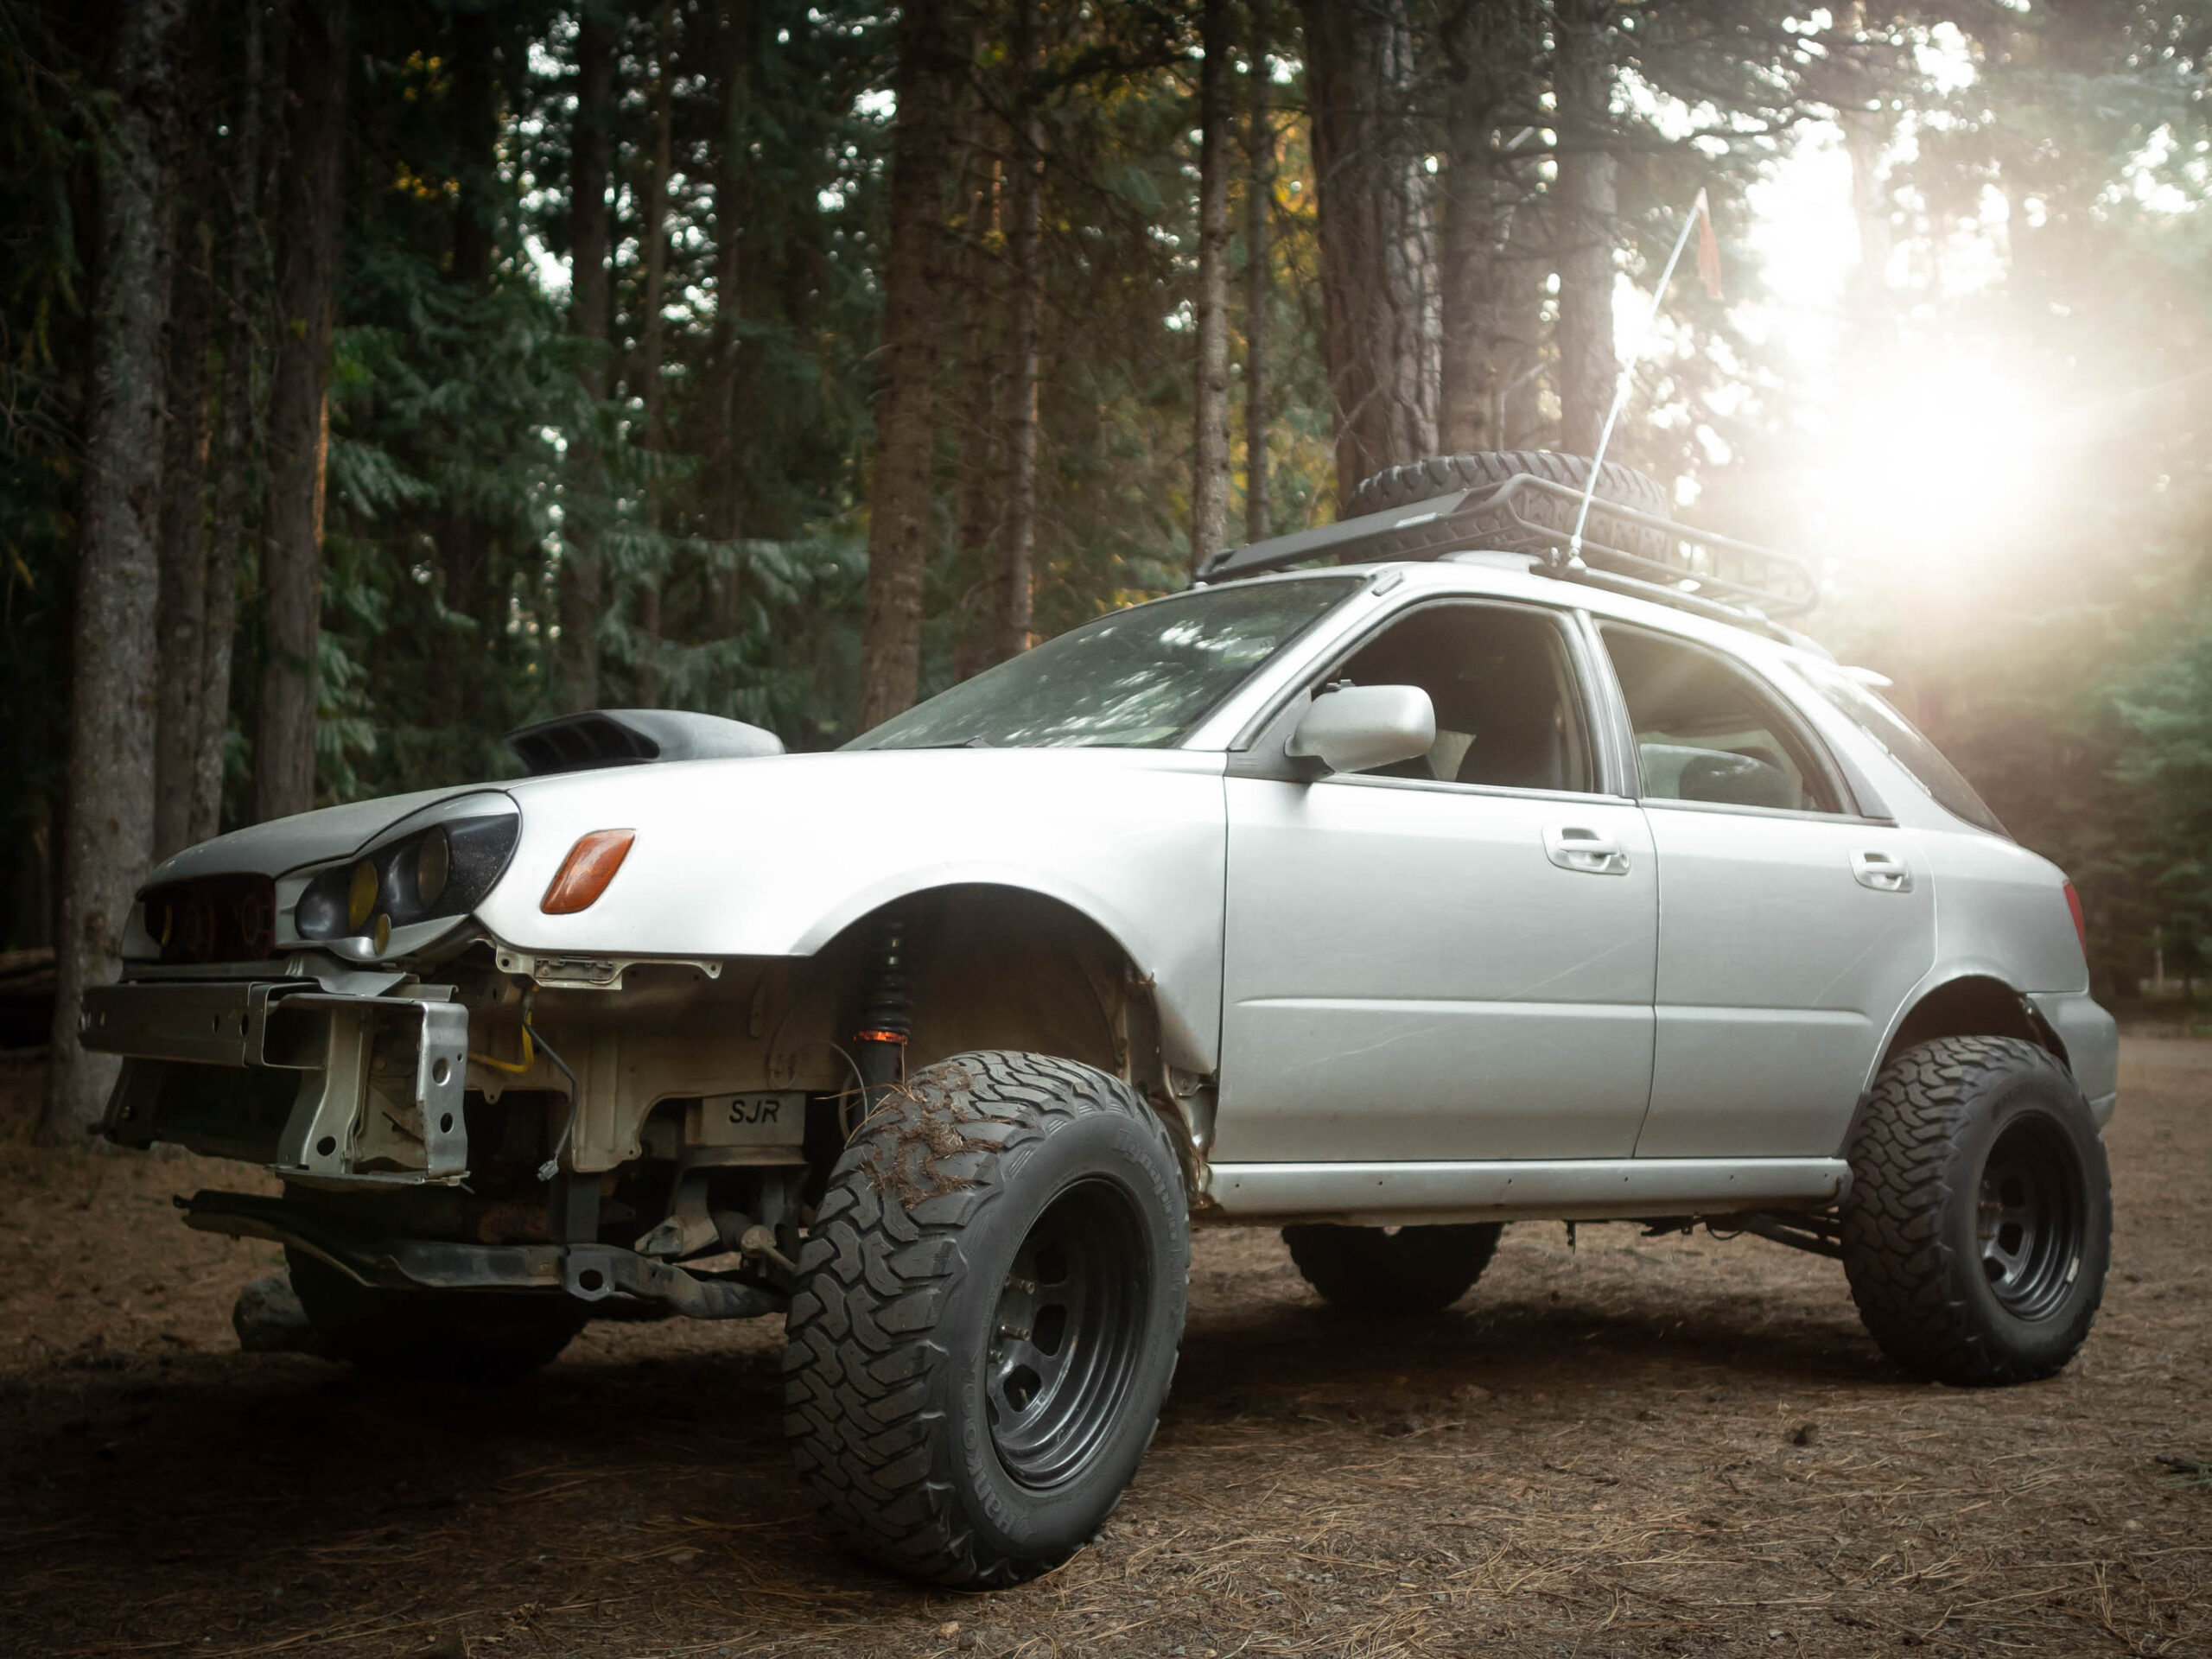 lifted subaru wrx offroad in the forest with Morette headlights and sunset